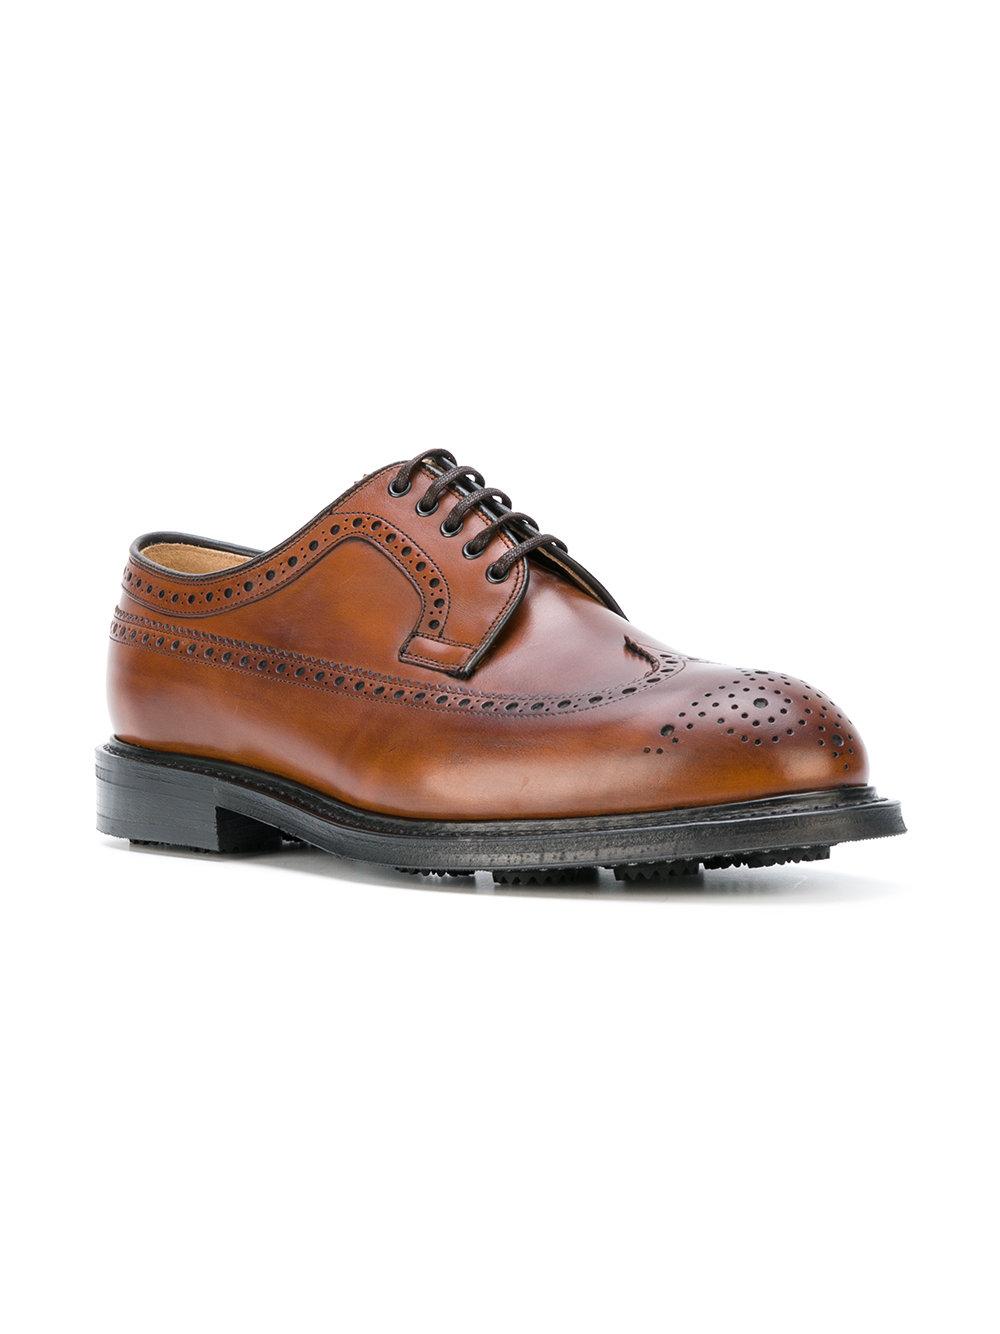 Church's Chunky Brogues in Brown for Men - Lyst